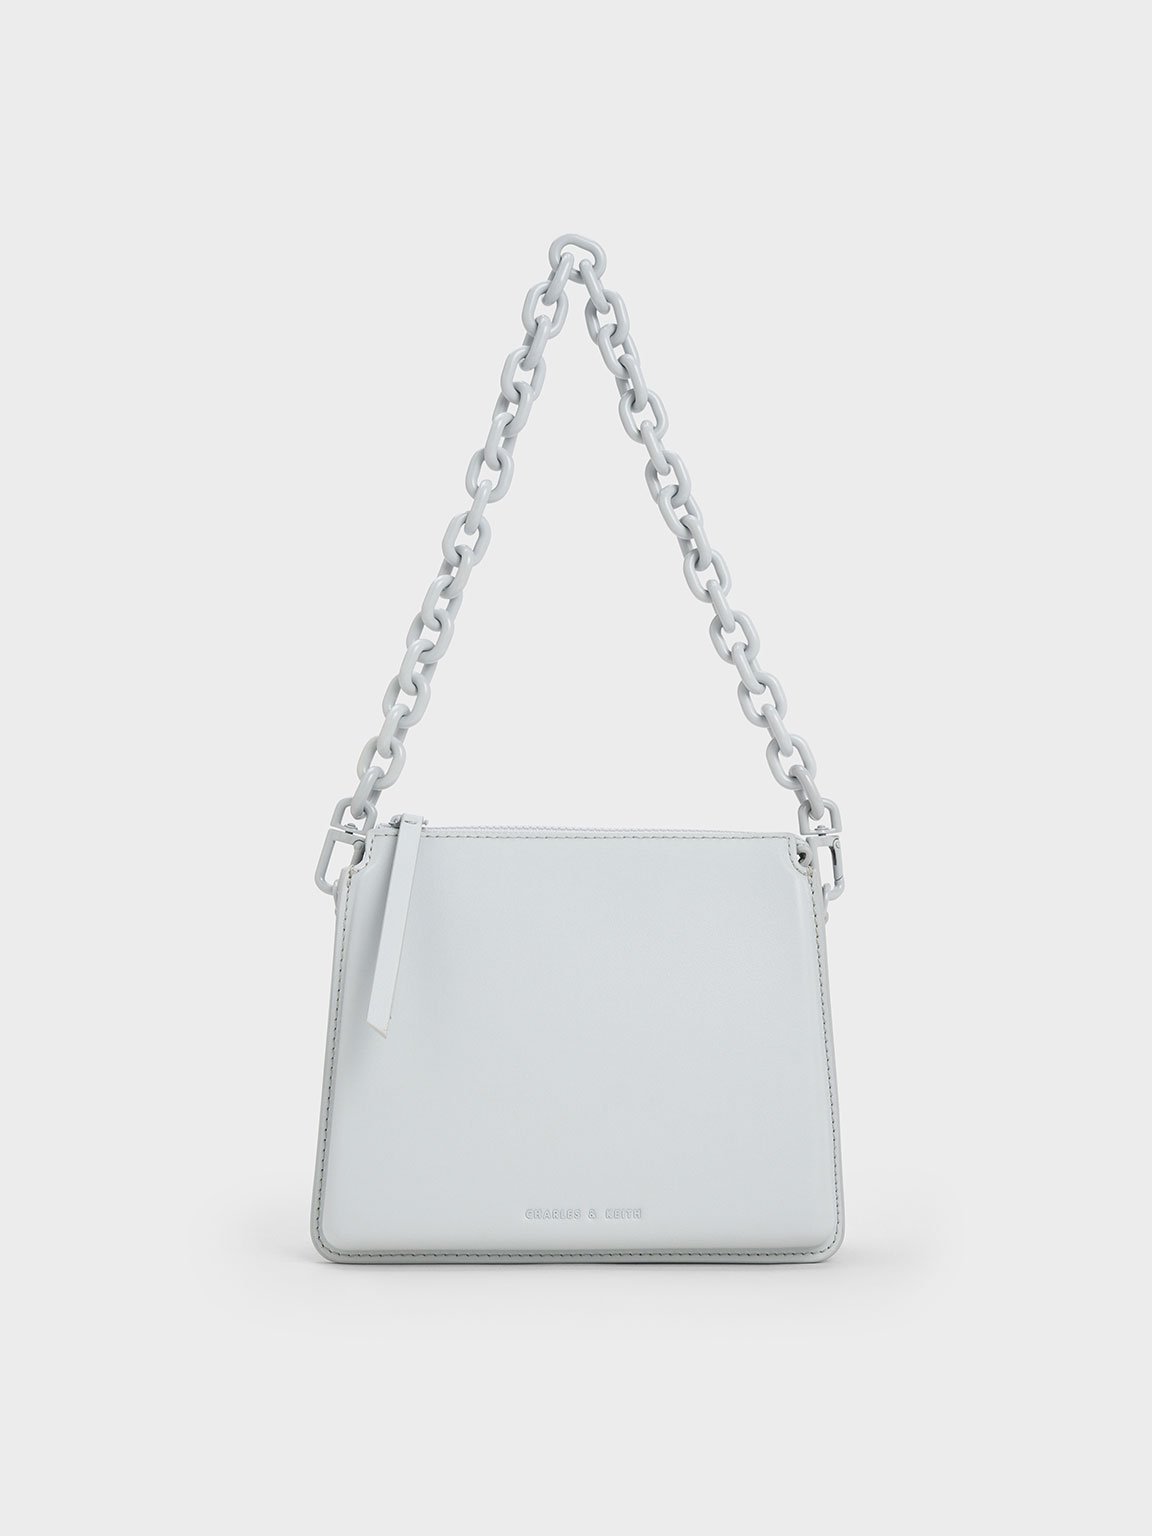 Charles & Keith Camelia Trapeze Crossbody Bag In Light Grey